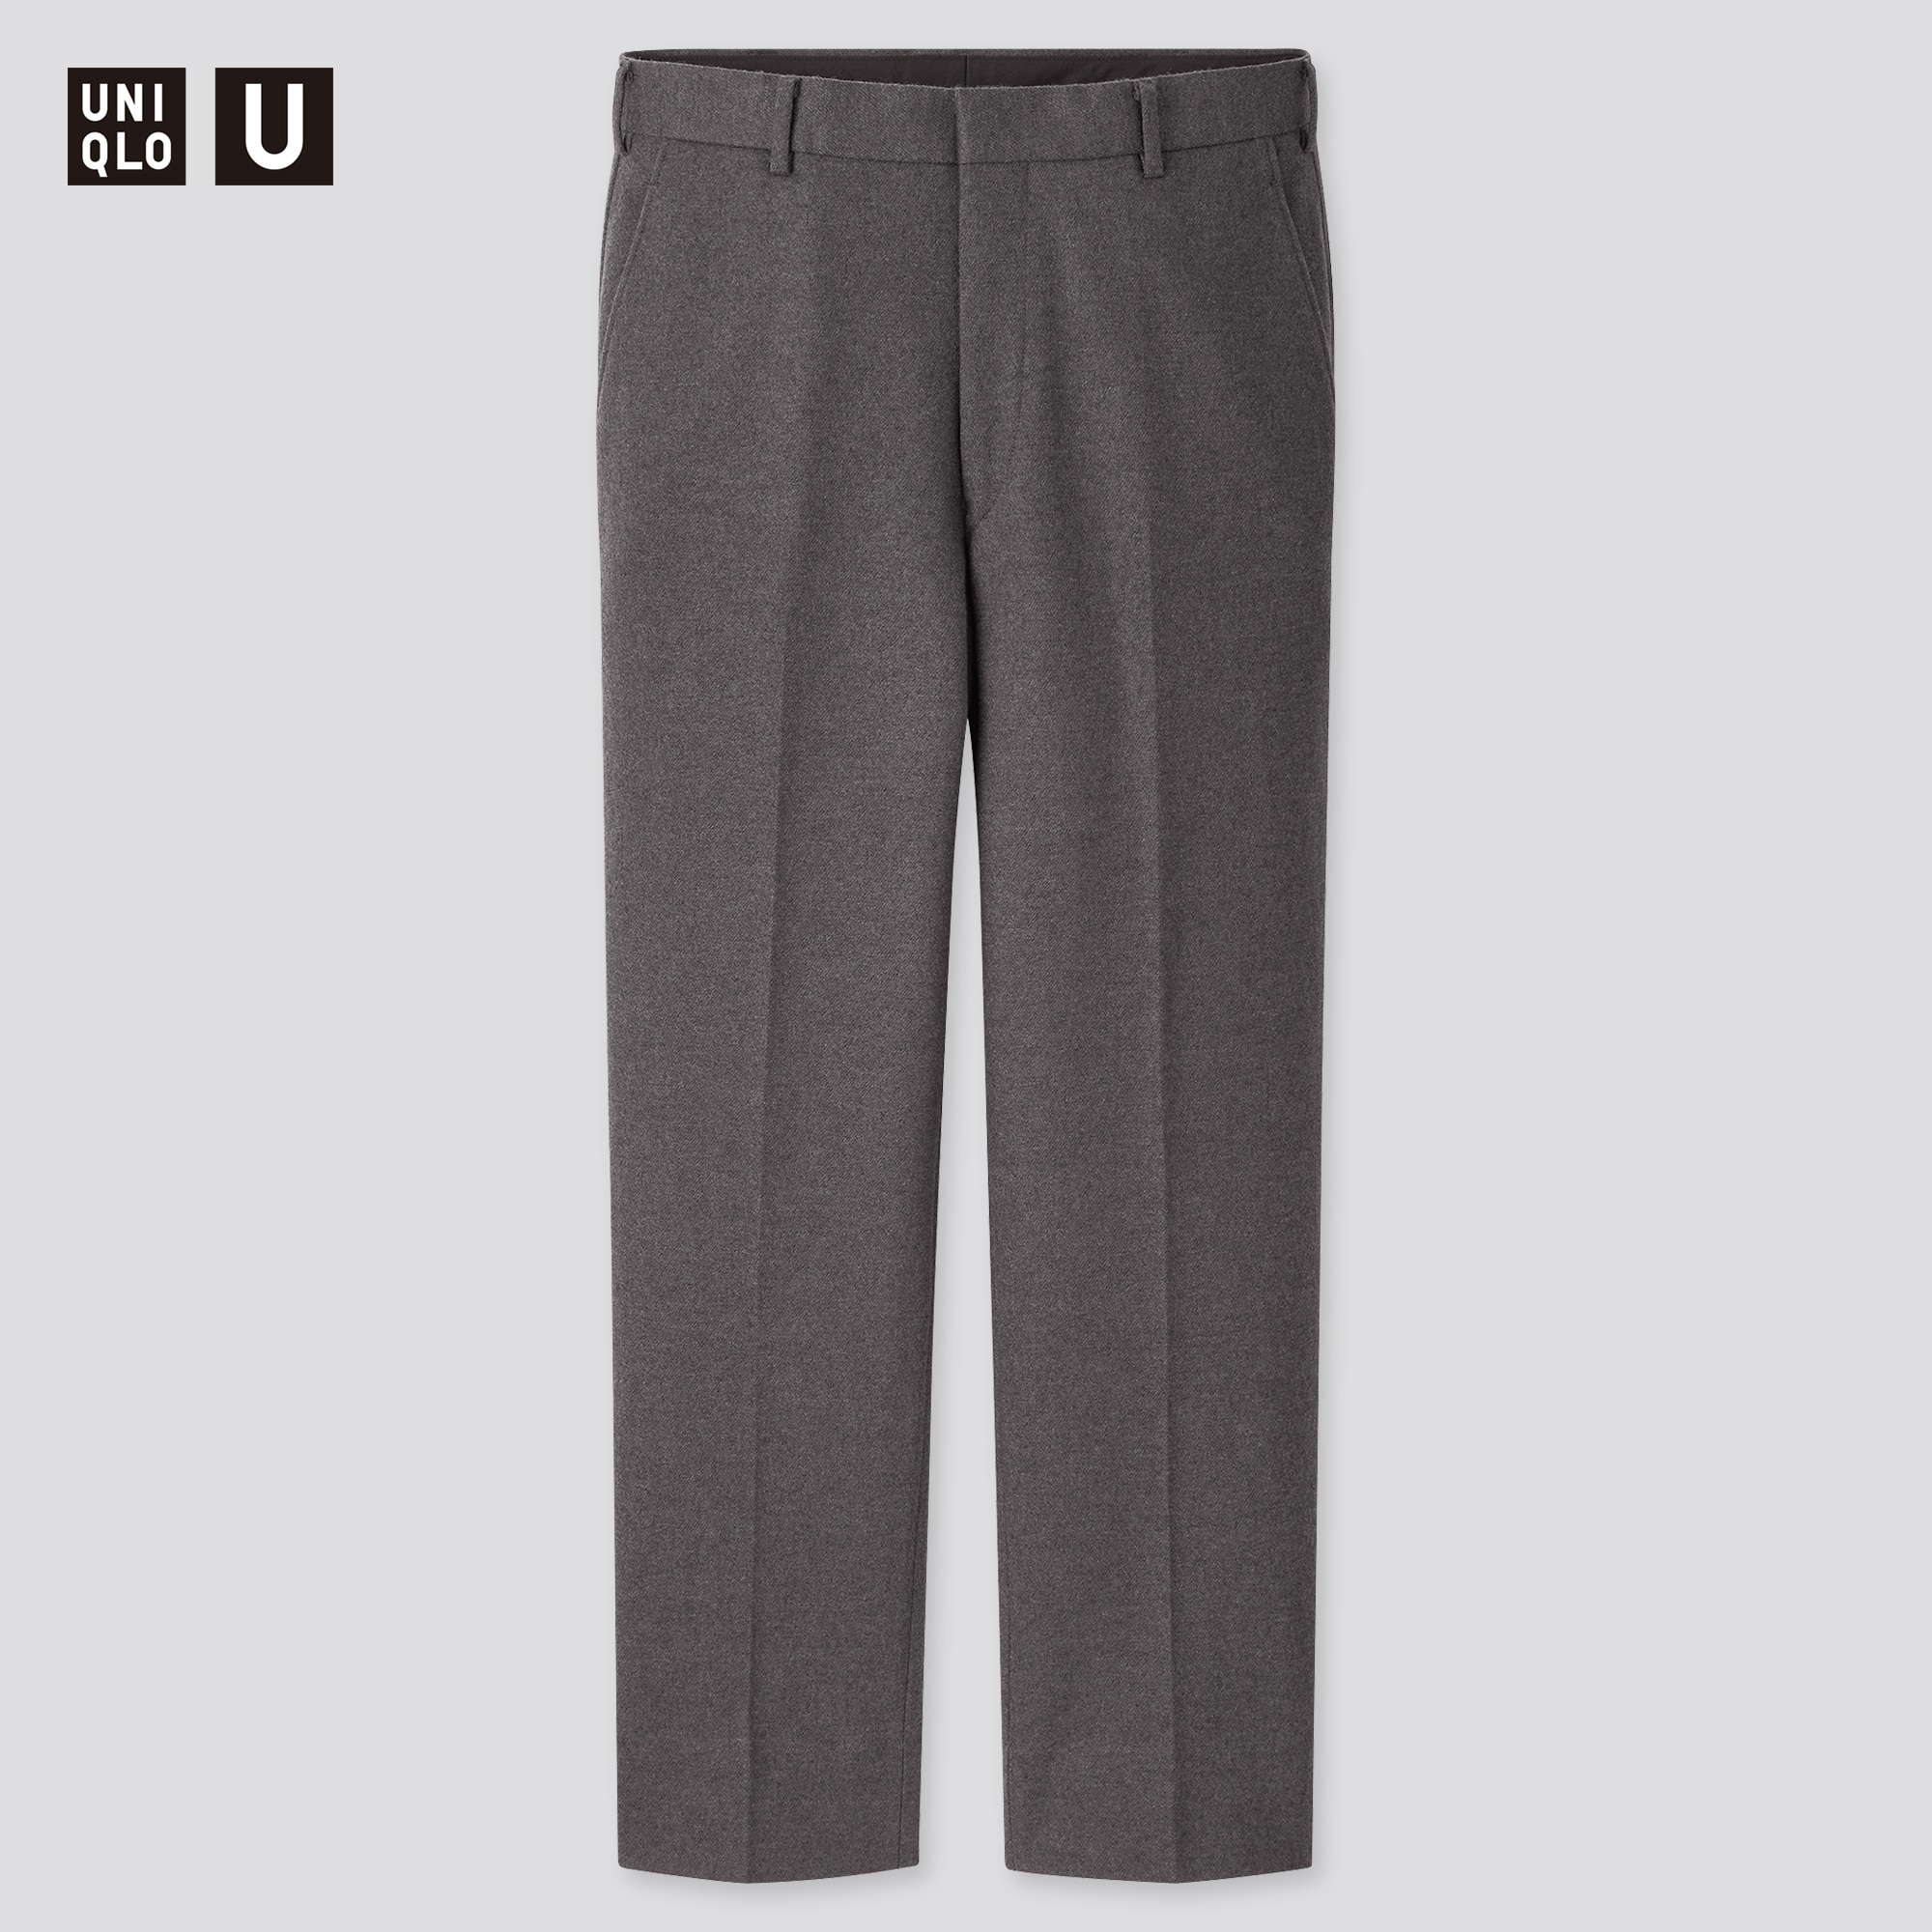 UNIQLO (M) Heattech 2Way Stretch Smart Ankle Pant Black, Men's Fashion,  Bottoms, Trousers on Carousell